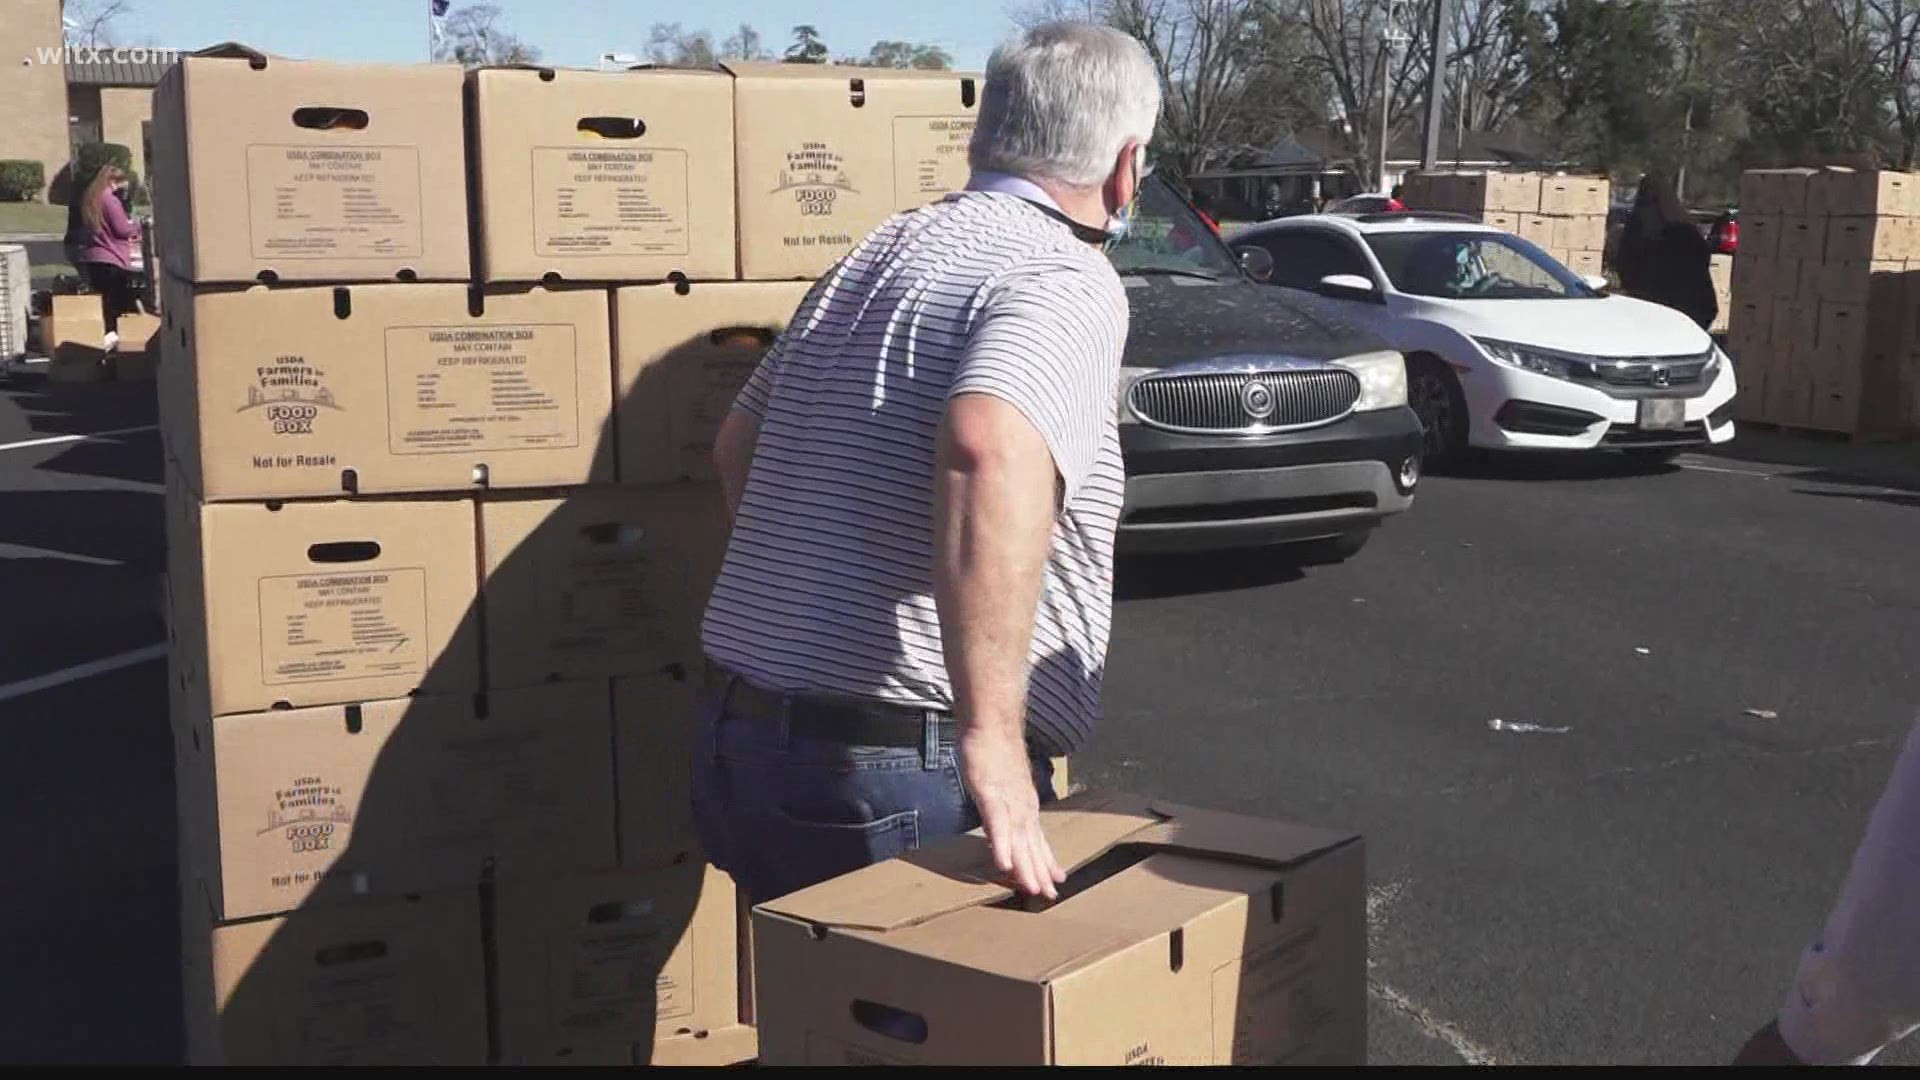 More than 1,000 boxes were distribute to families in need.